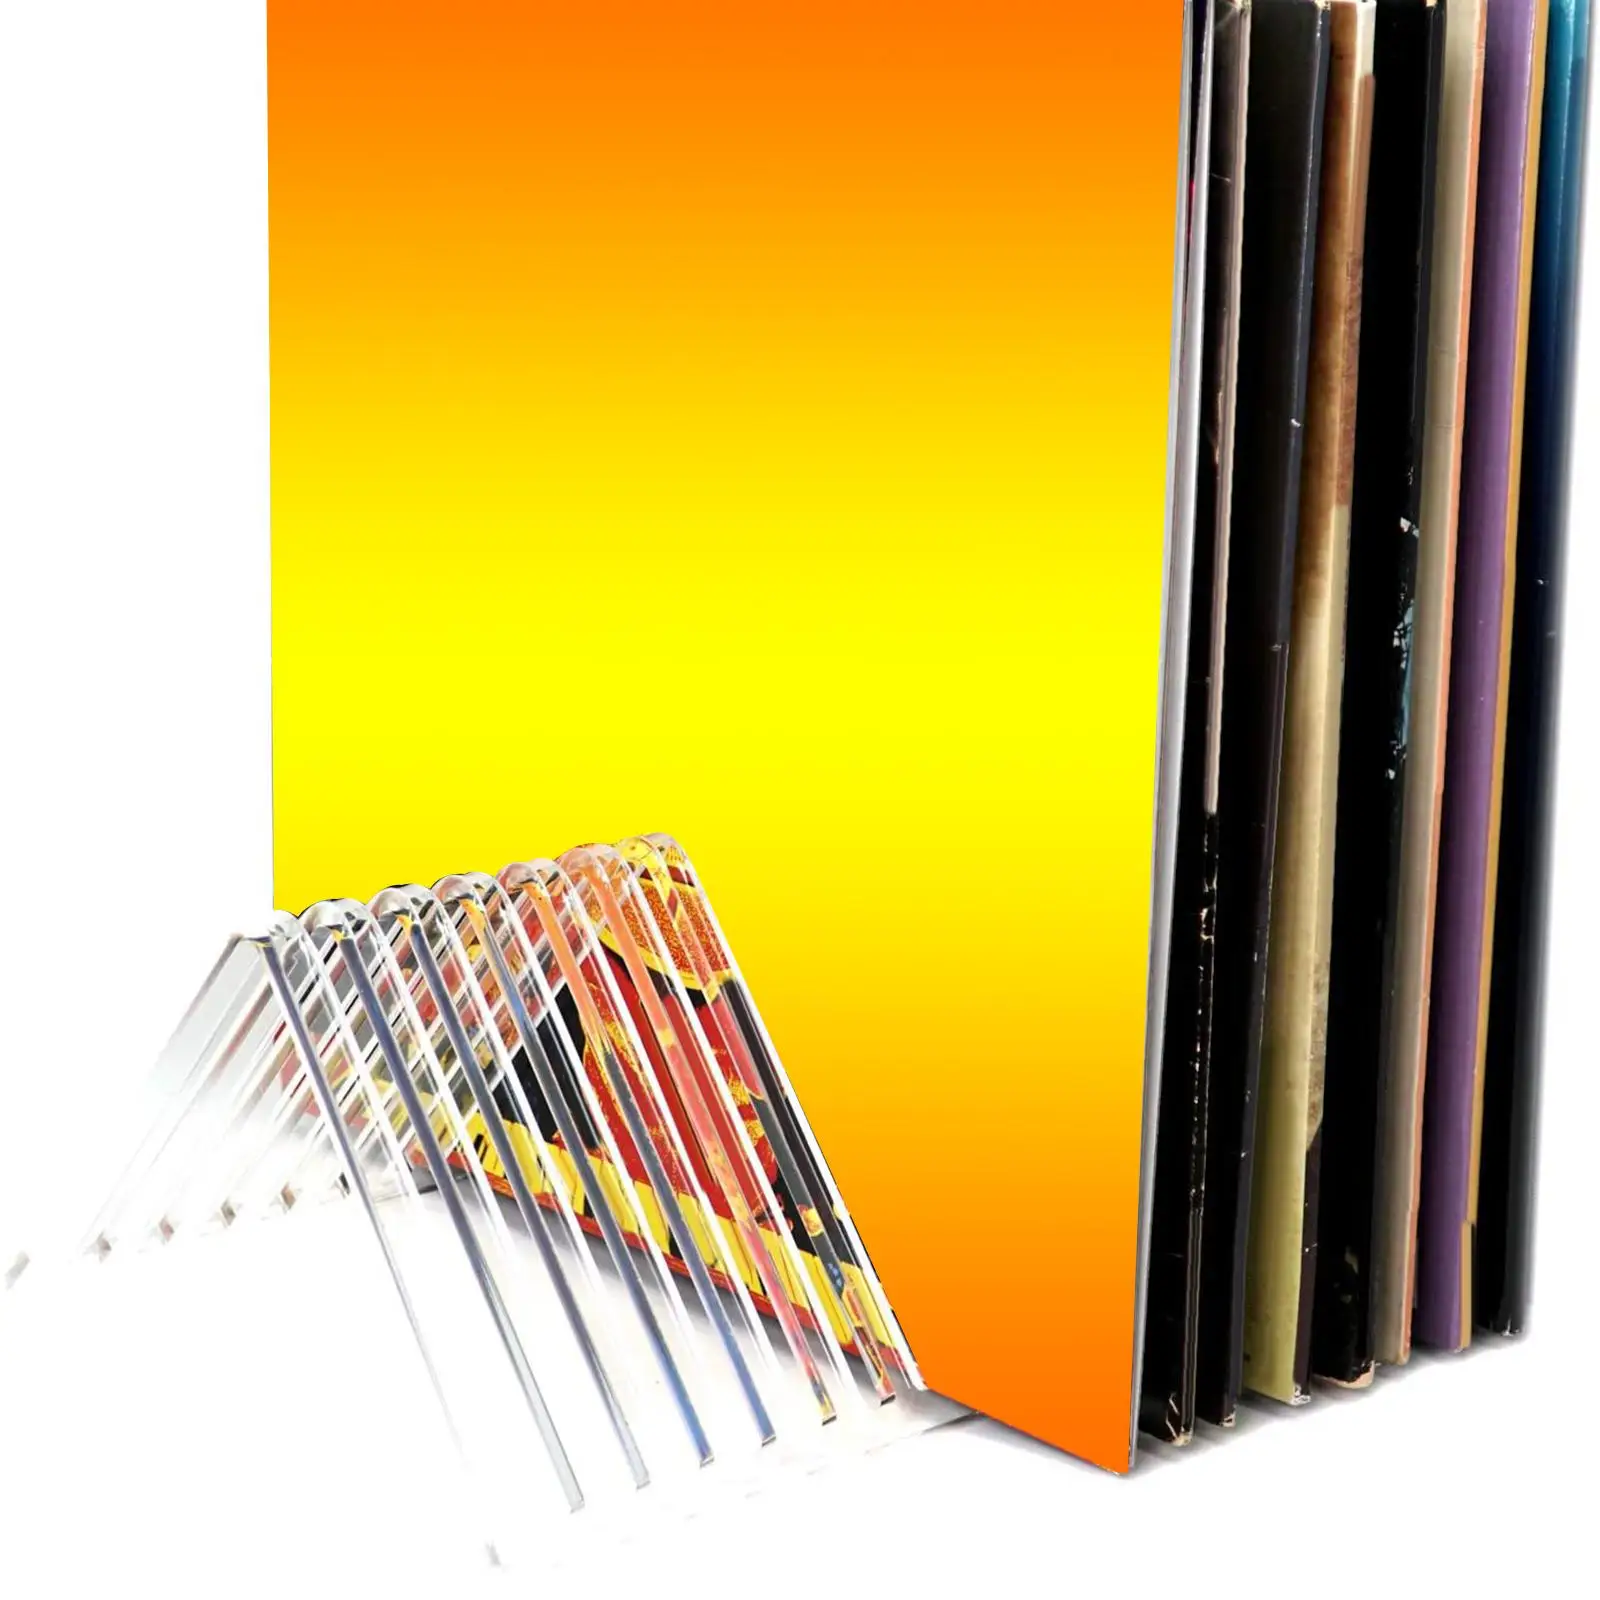 Vinyl Record Storage - Clear Acrylic Holder - Premium Design, Stores and support 12 Albums